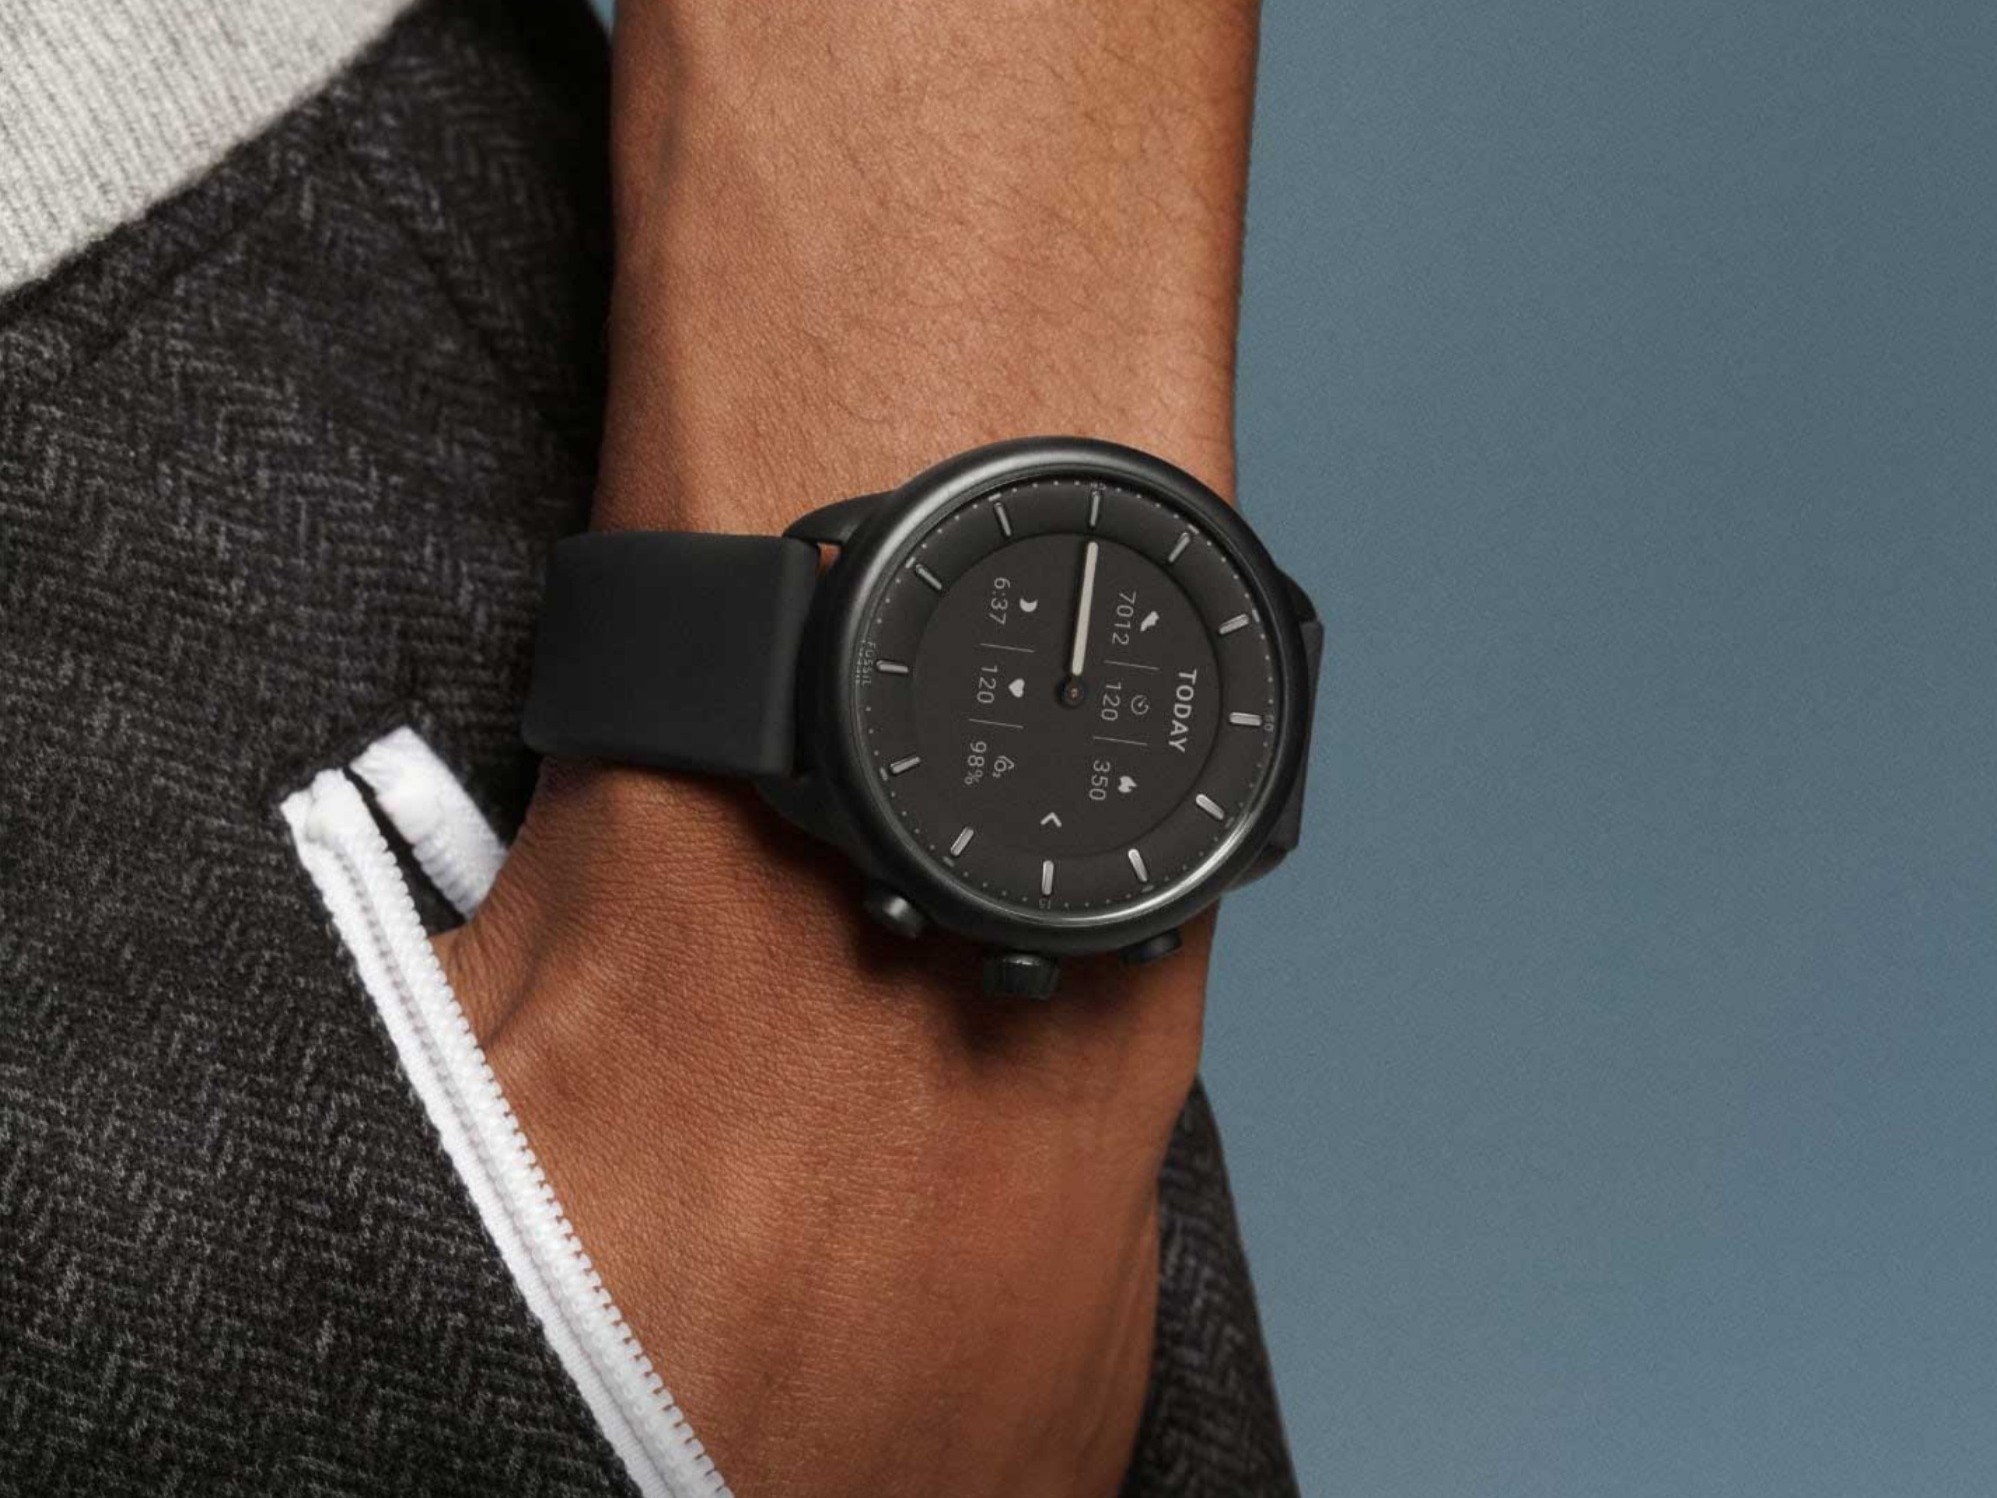 Fossil Gen 6 Wellness Edition Hybrid smartwatch launches E-ink display for 14-day battery life - NotebookCheck.net